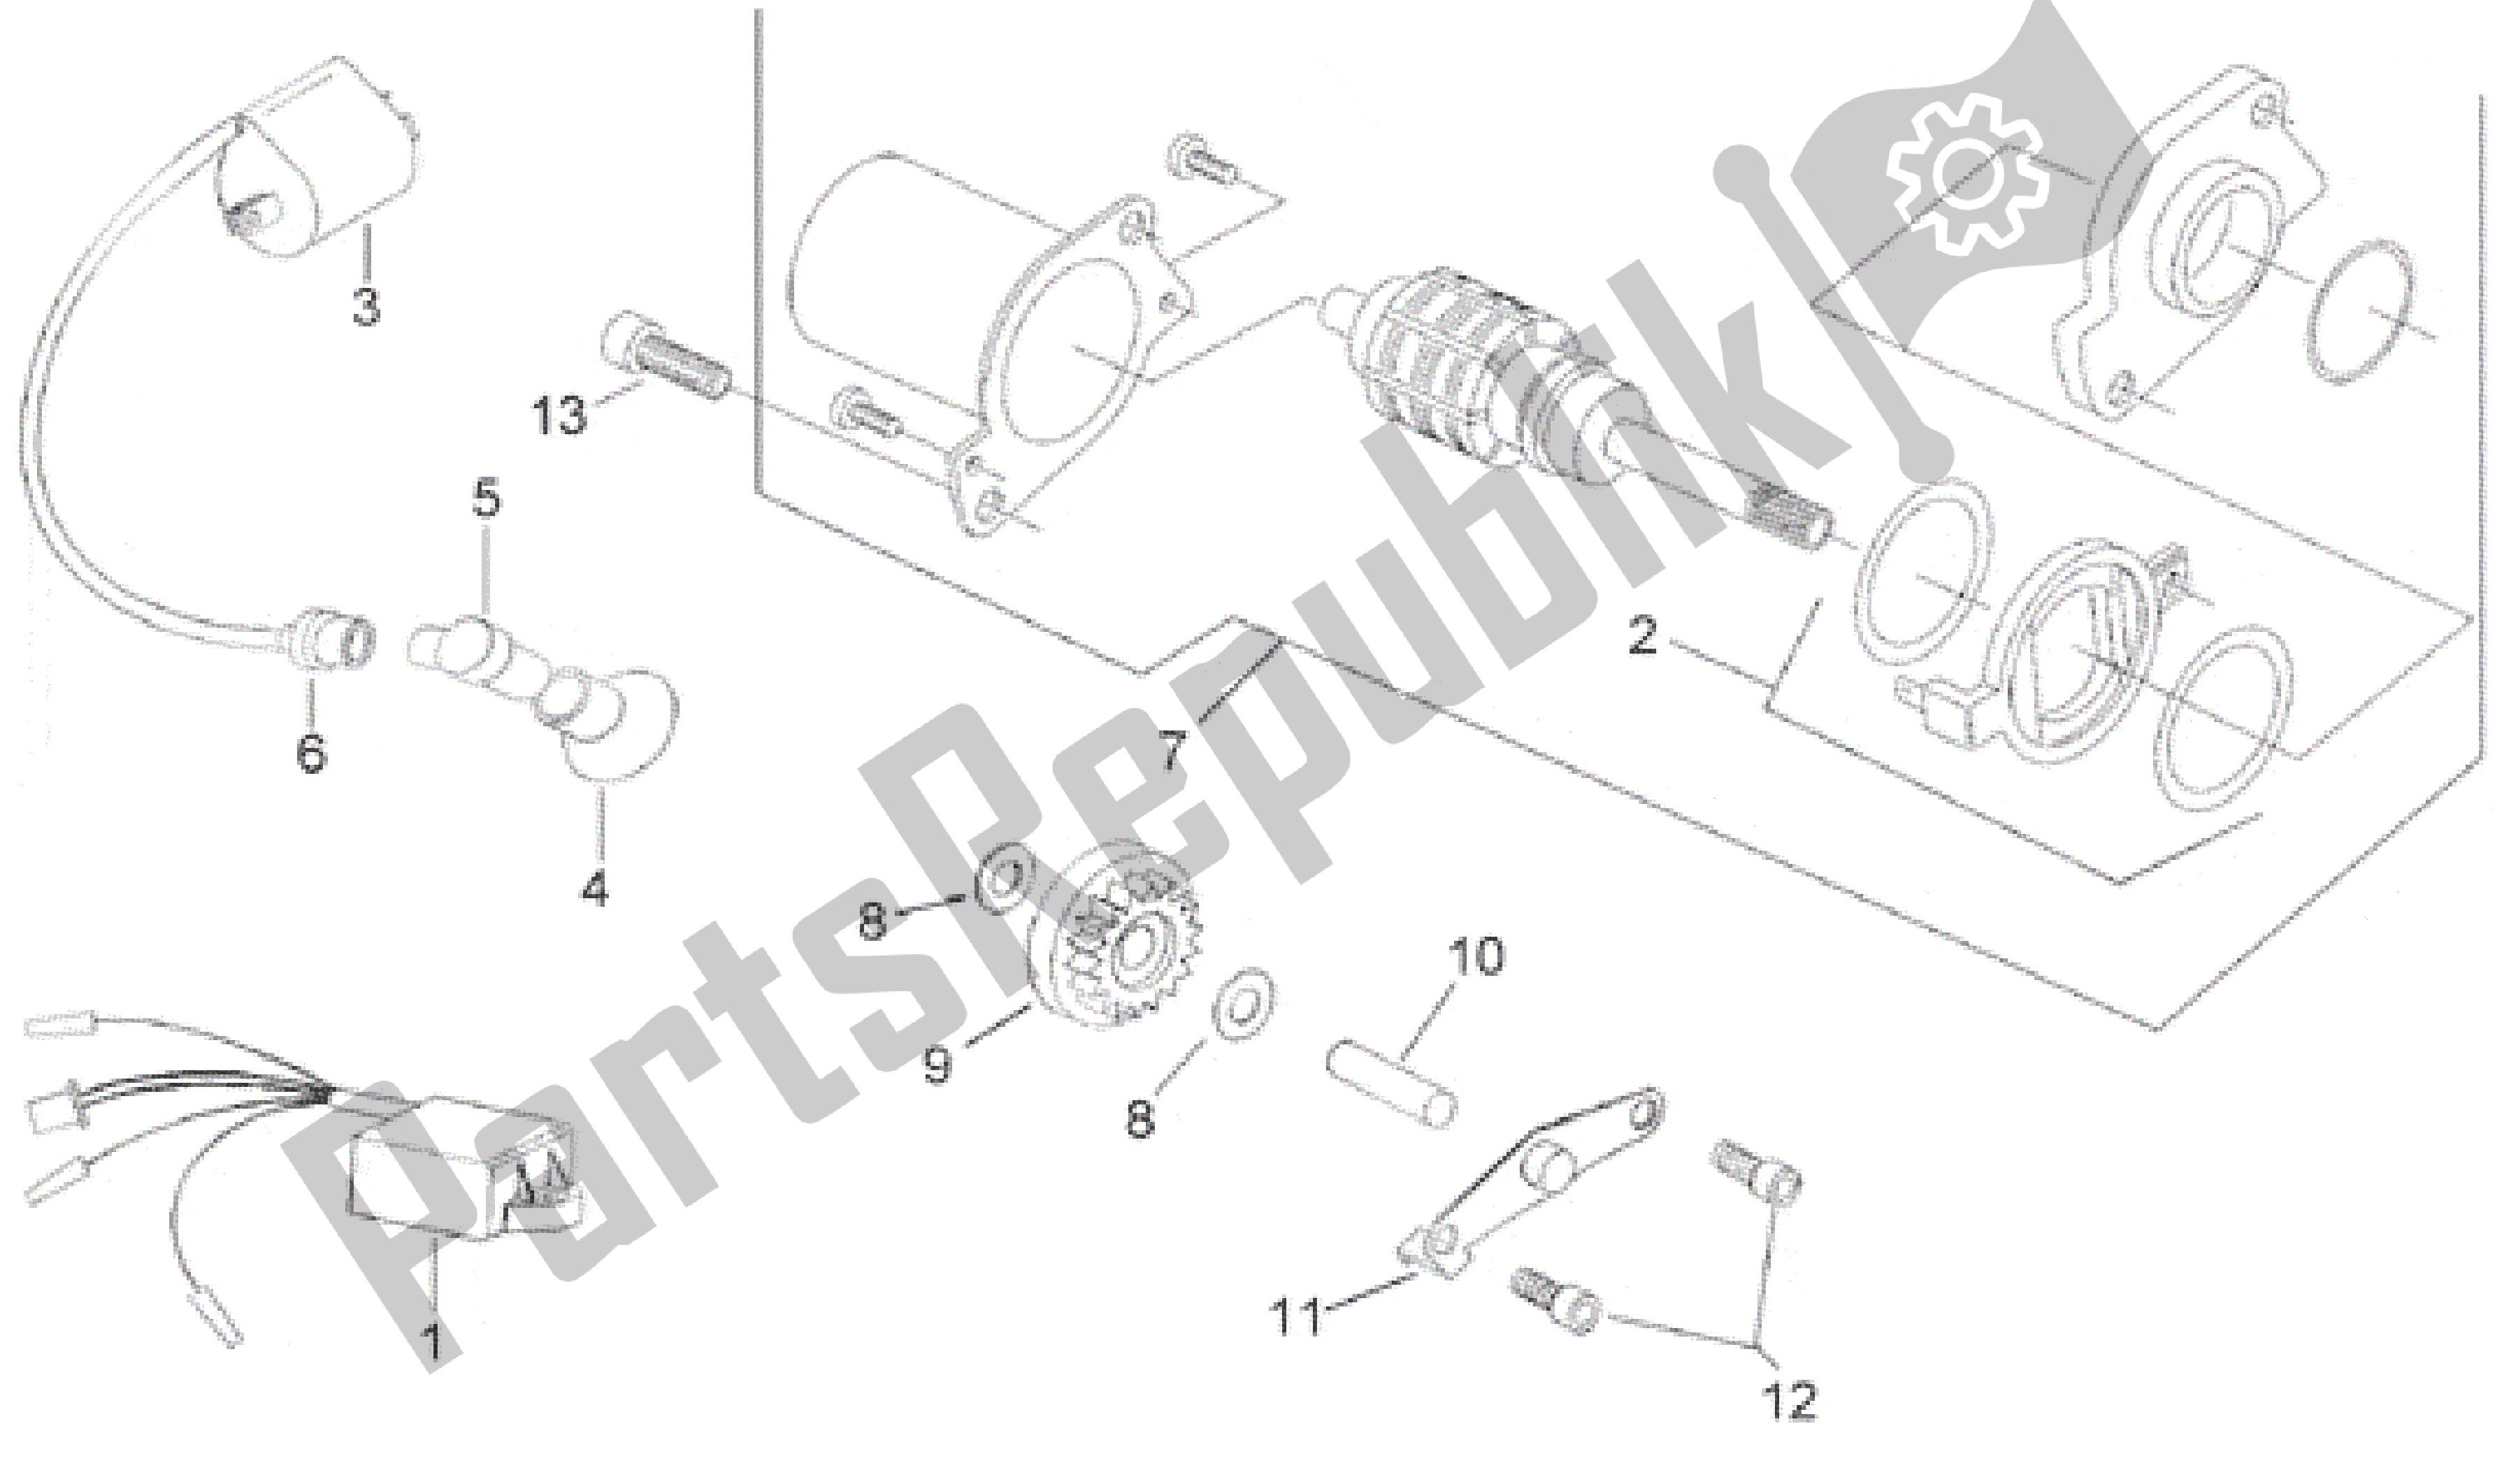 All parts for the Ignition Unit of the Aprilia Scarabeo 50 1998